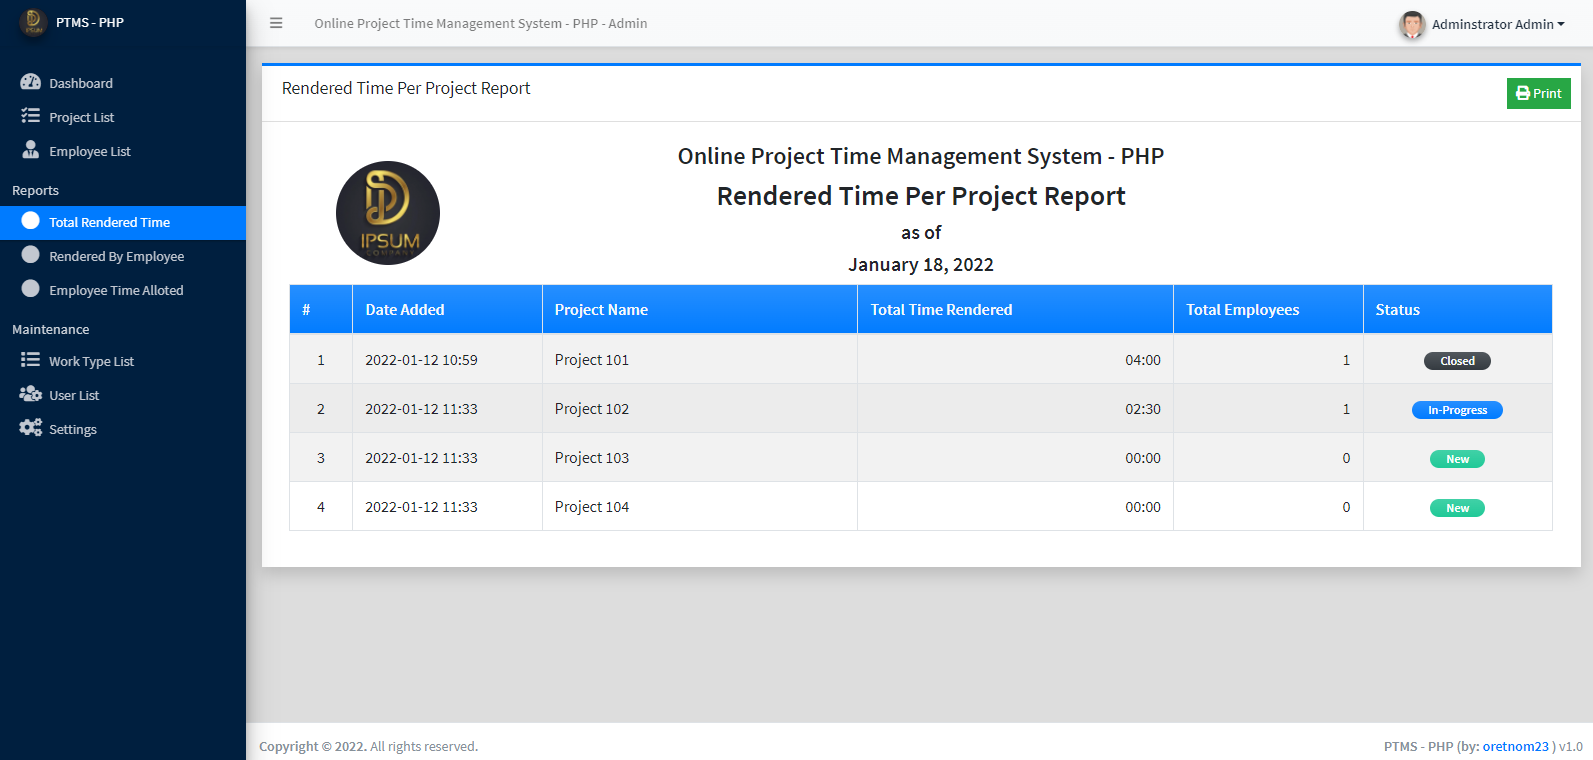 Online Project Time Management System